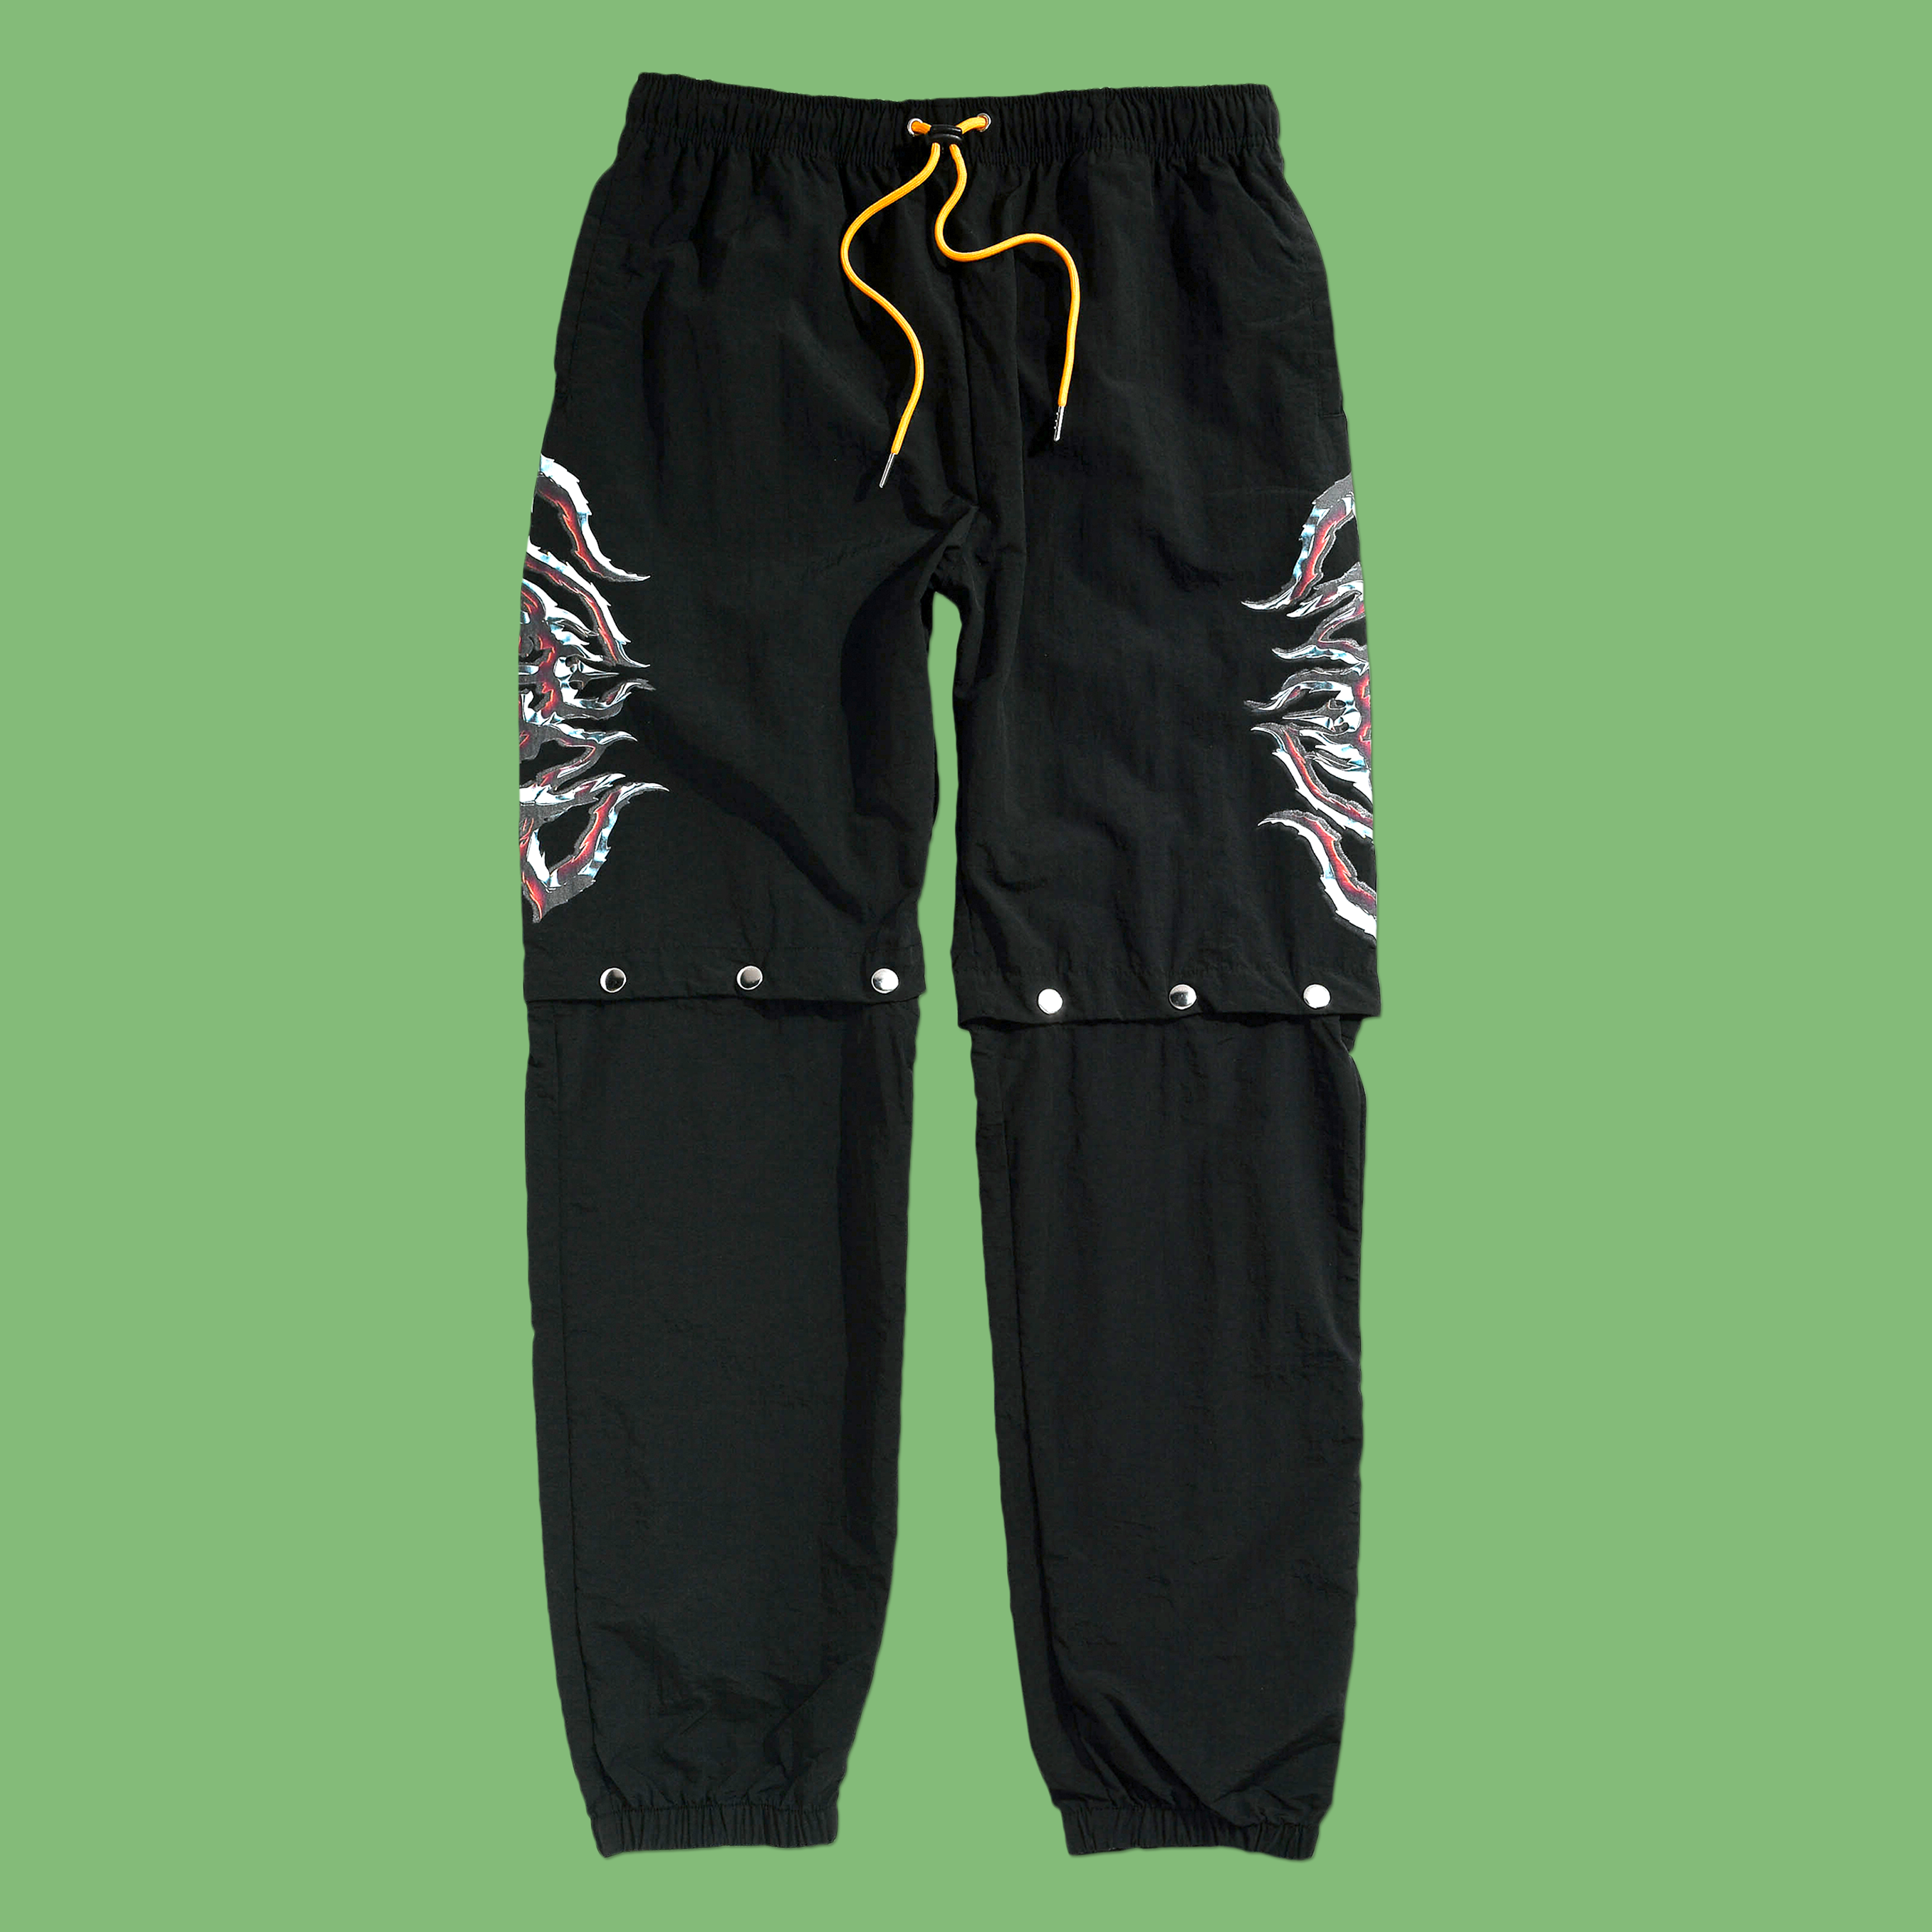 Rustic Metal Joggers from clothing brand SWIXXZ by Maggie Lindemann - Front